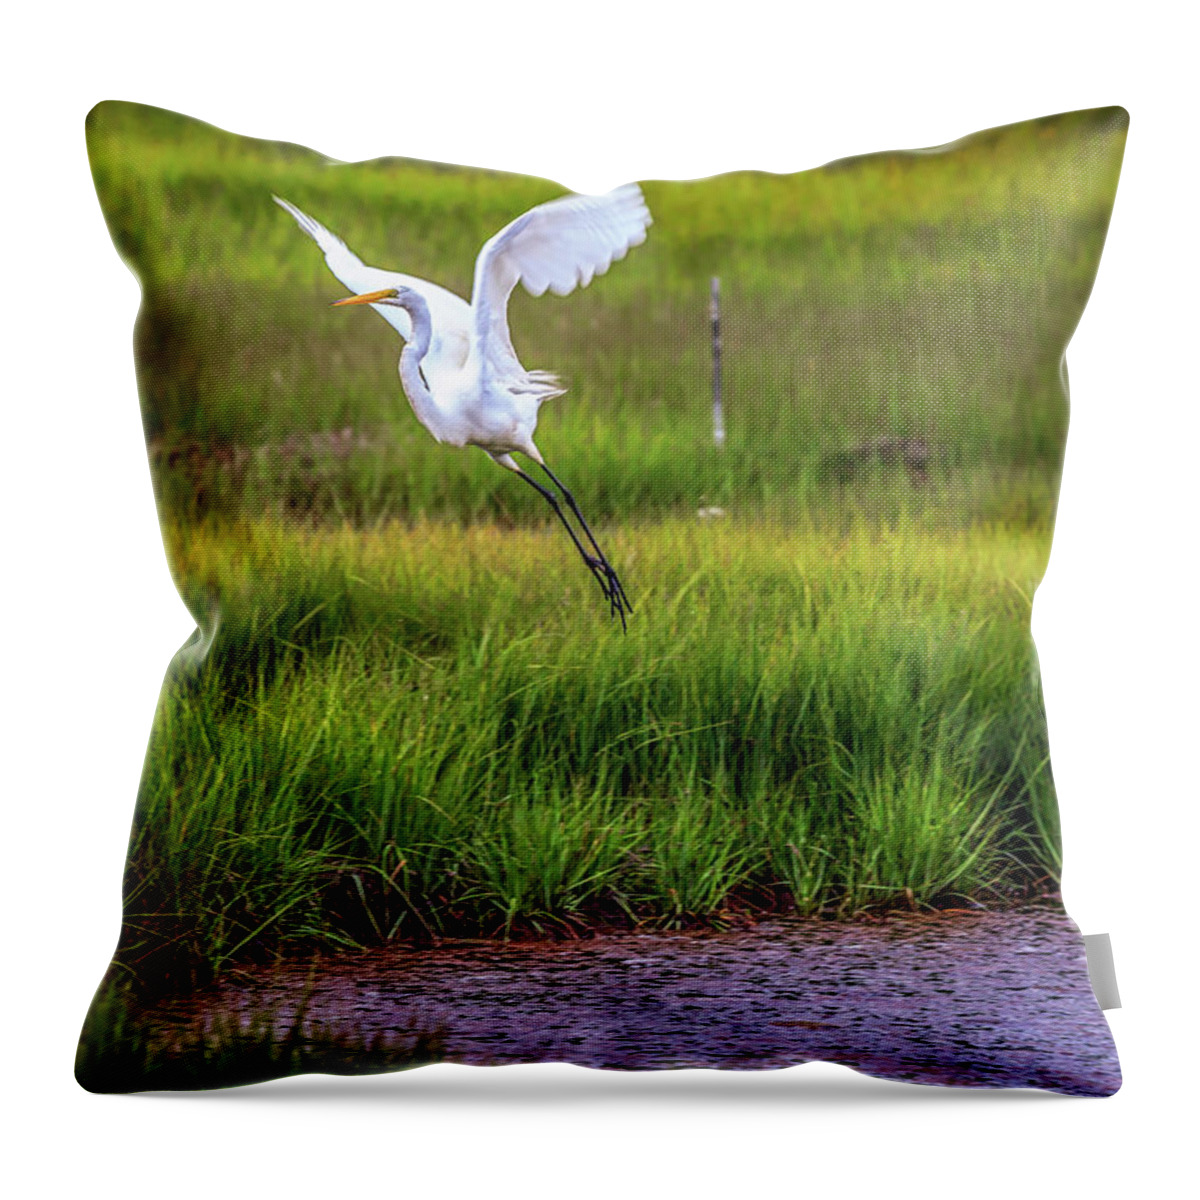 Grass Throw Pillow featuring the photograph Parker National Wildlife Refuge by (c) Swapan Jha